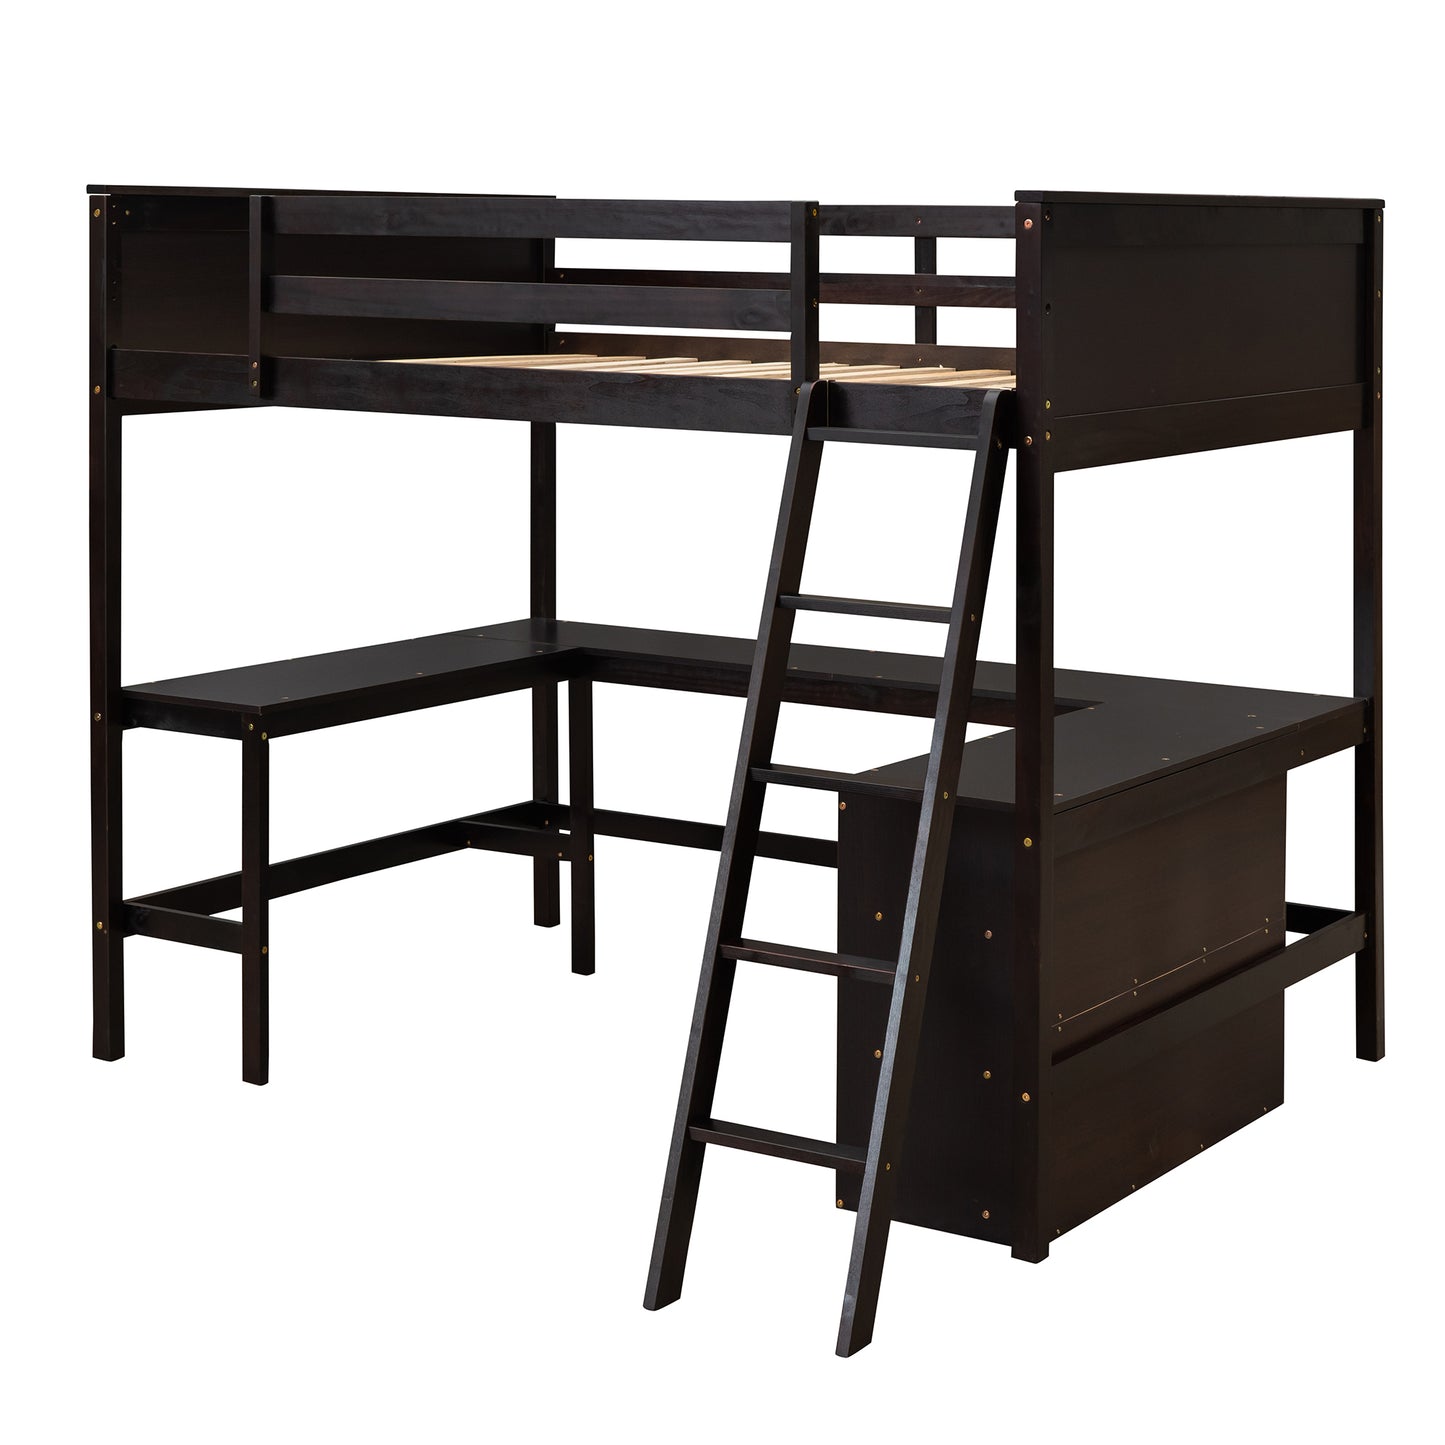 Full size Loft Bed with Shelves and Desk, Wooden Loft Bed with Desk - Espresso